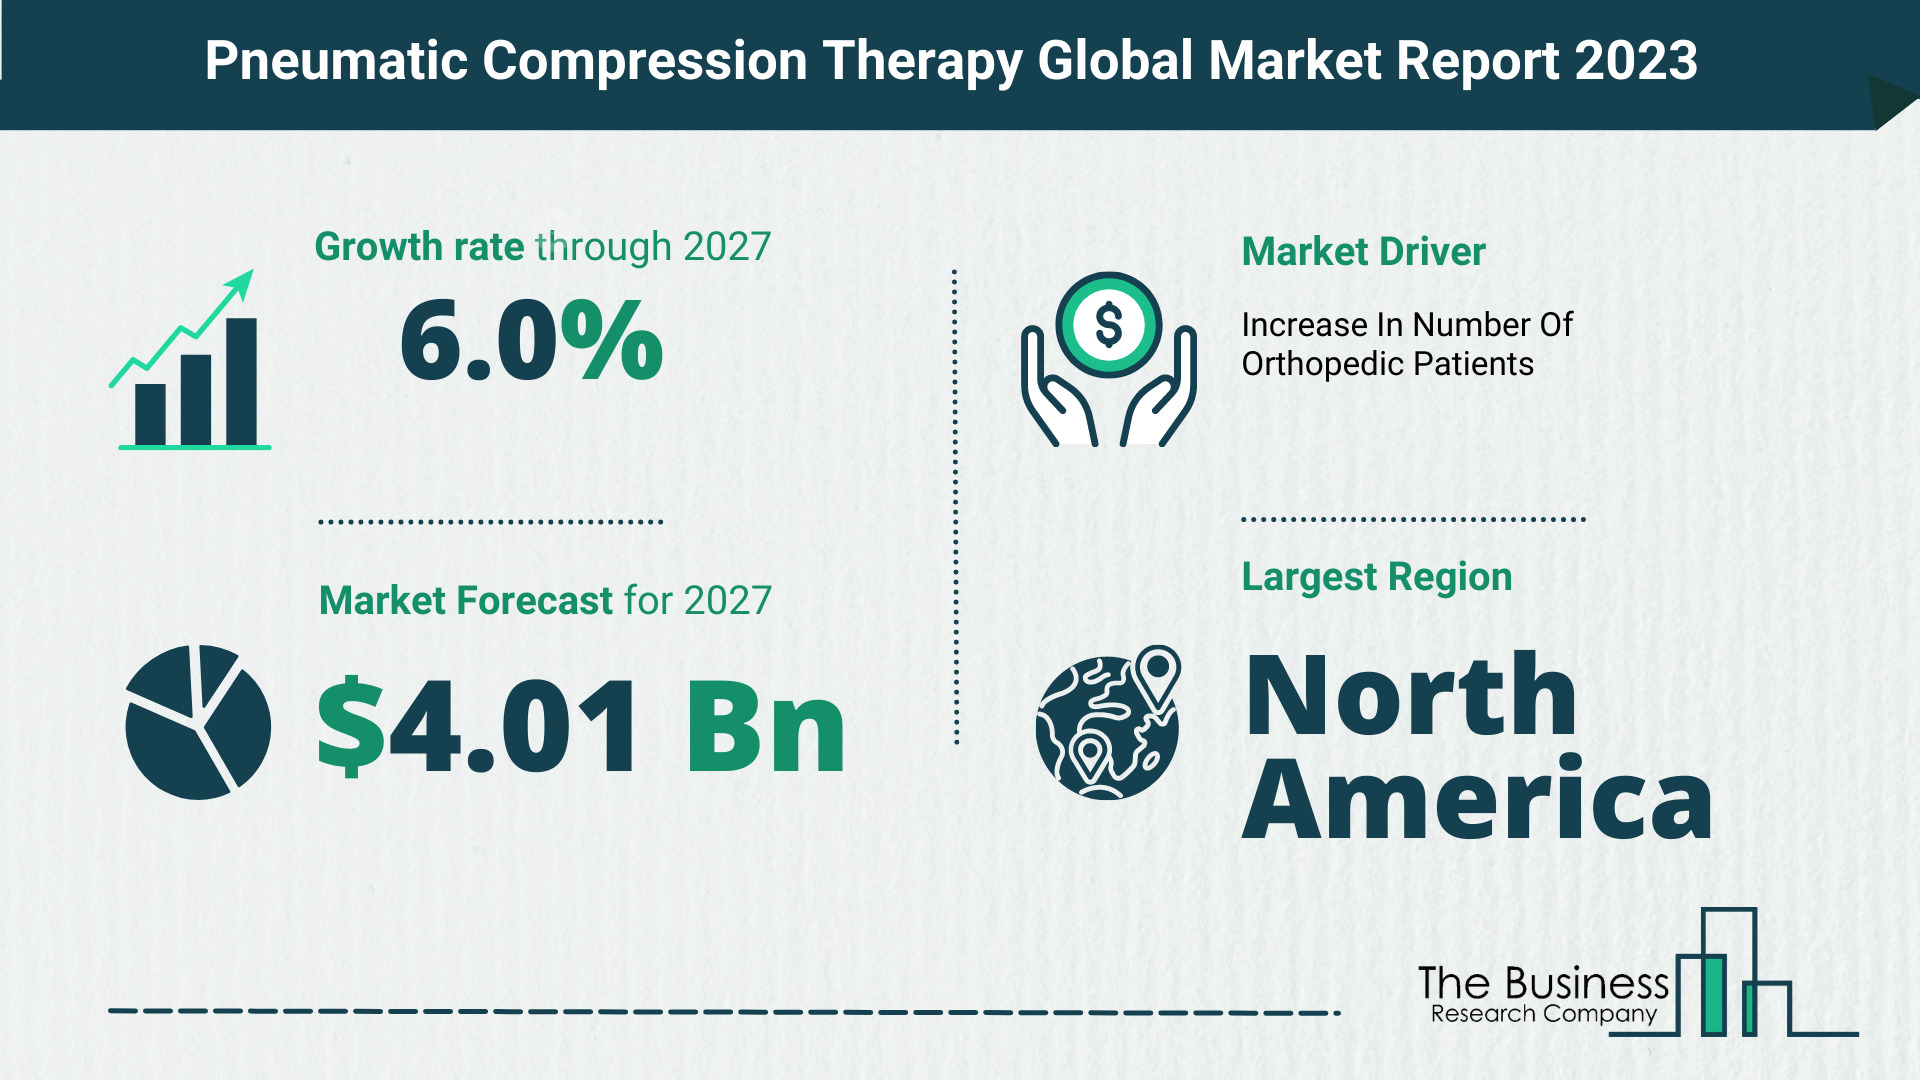 What Will The Pneumatic Compression Therapy Market Look Like In 2023?